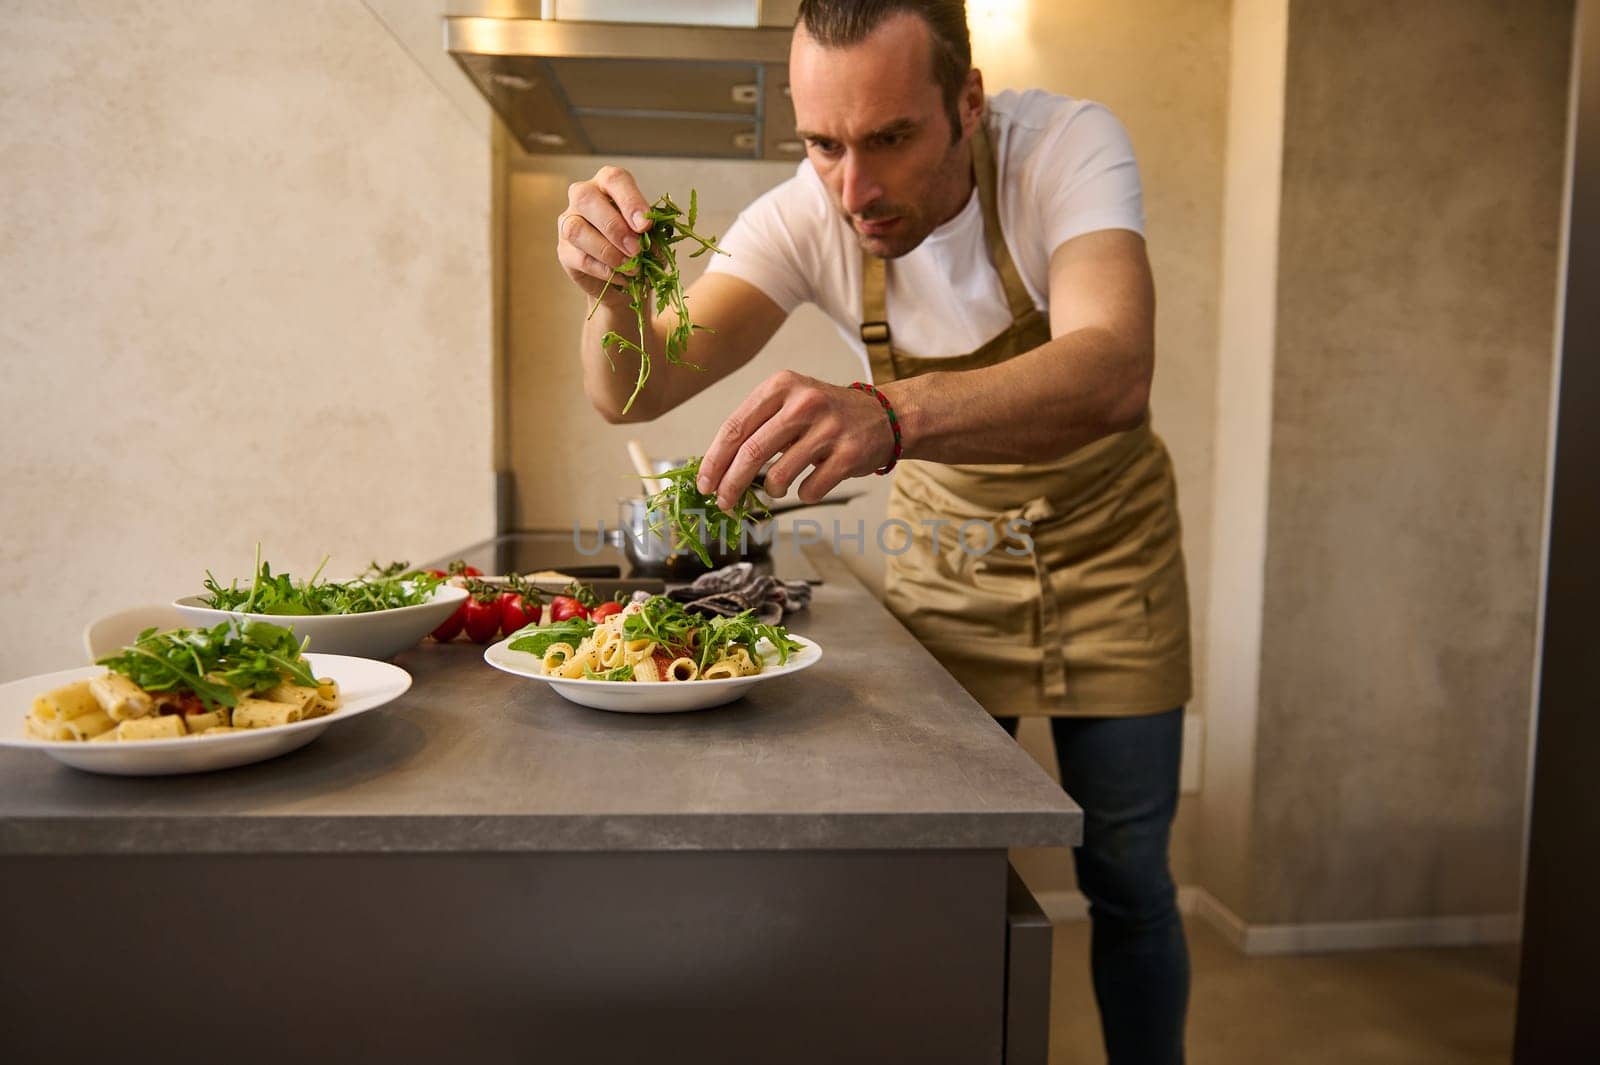 Handsome chef cooking delicious Italian pasta with the sauce, seasoning adding fresh arugula leaves and grated parmesan cheese on the pasta in a plate, standing at kitchen counter. Decoration of dish by artgf